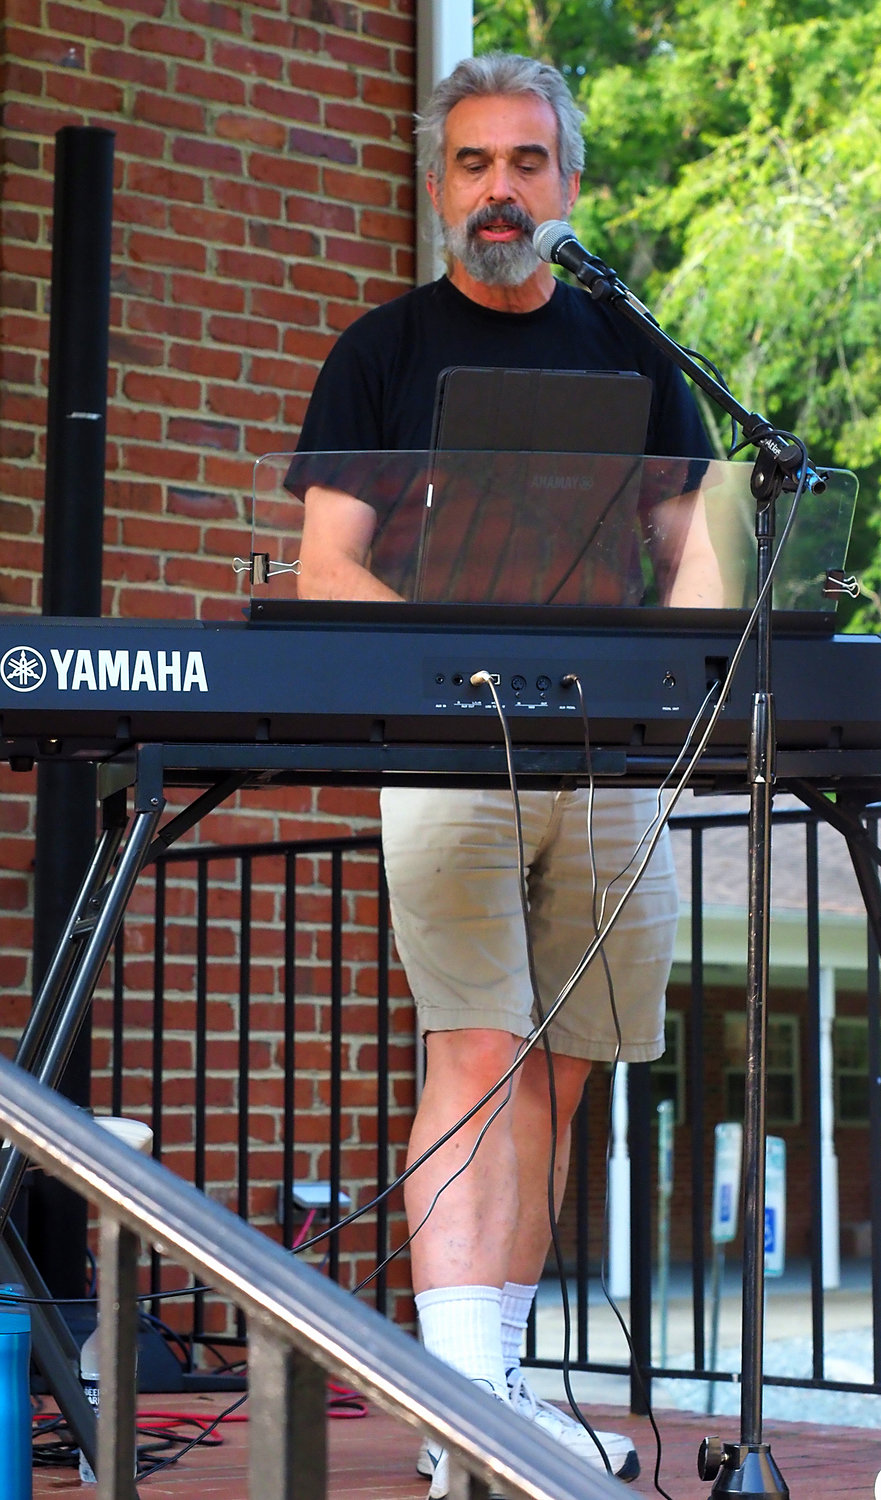 Erich Lieth of Chapel Hill sang and played keyboard at Cedar Grove UMC's 'summer fiesta' last Saturday in Pittsboro.